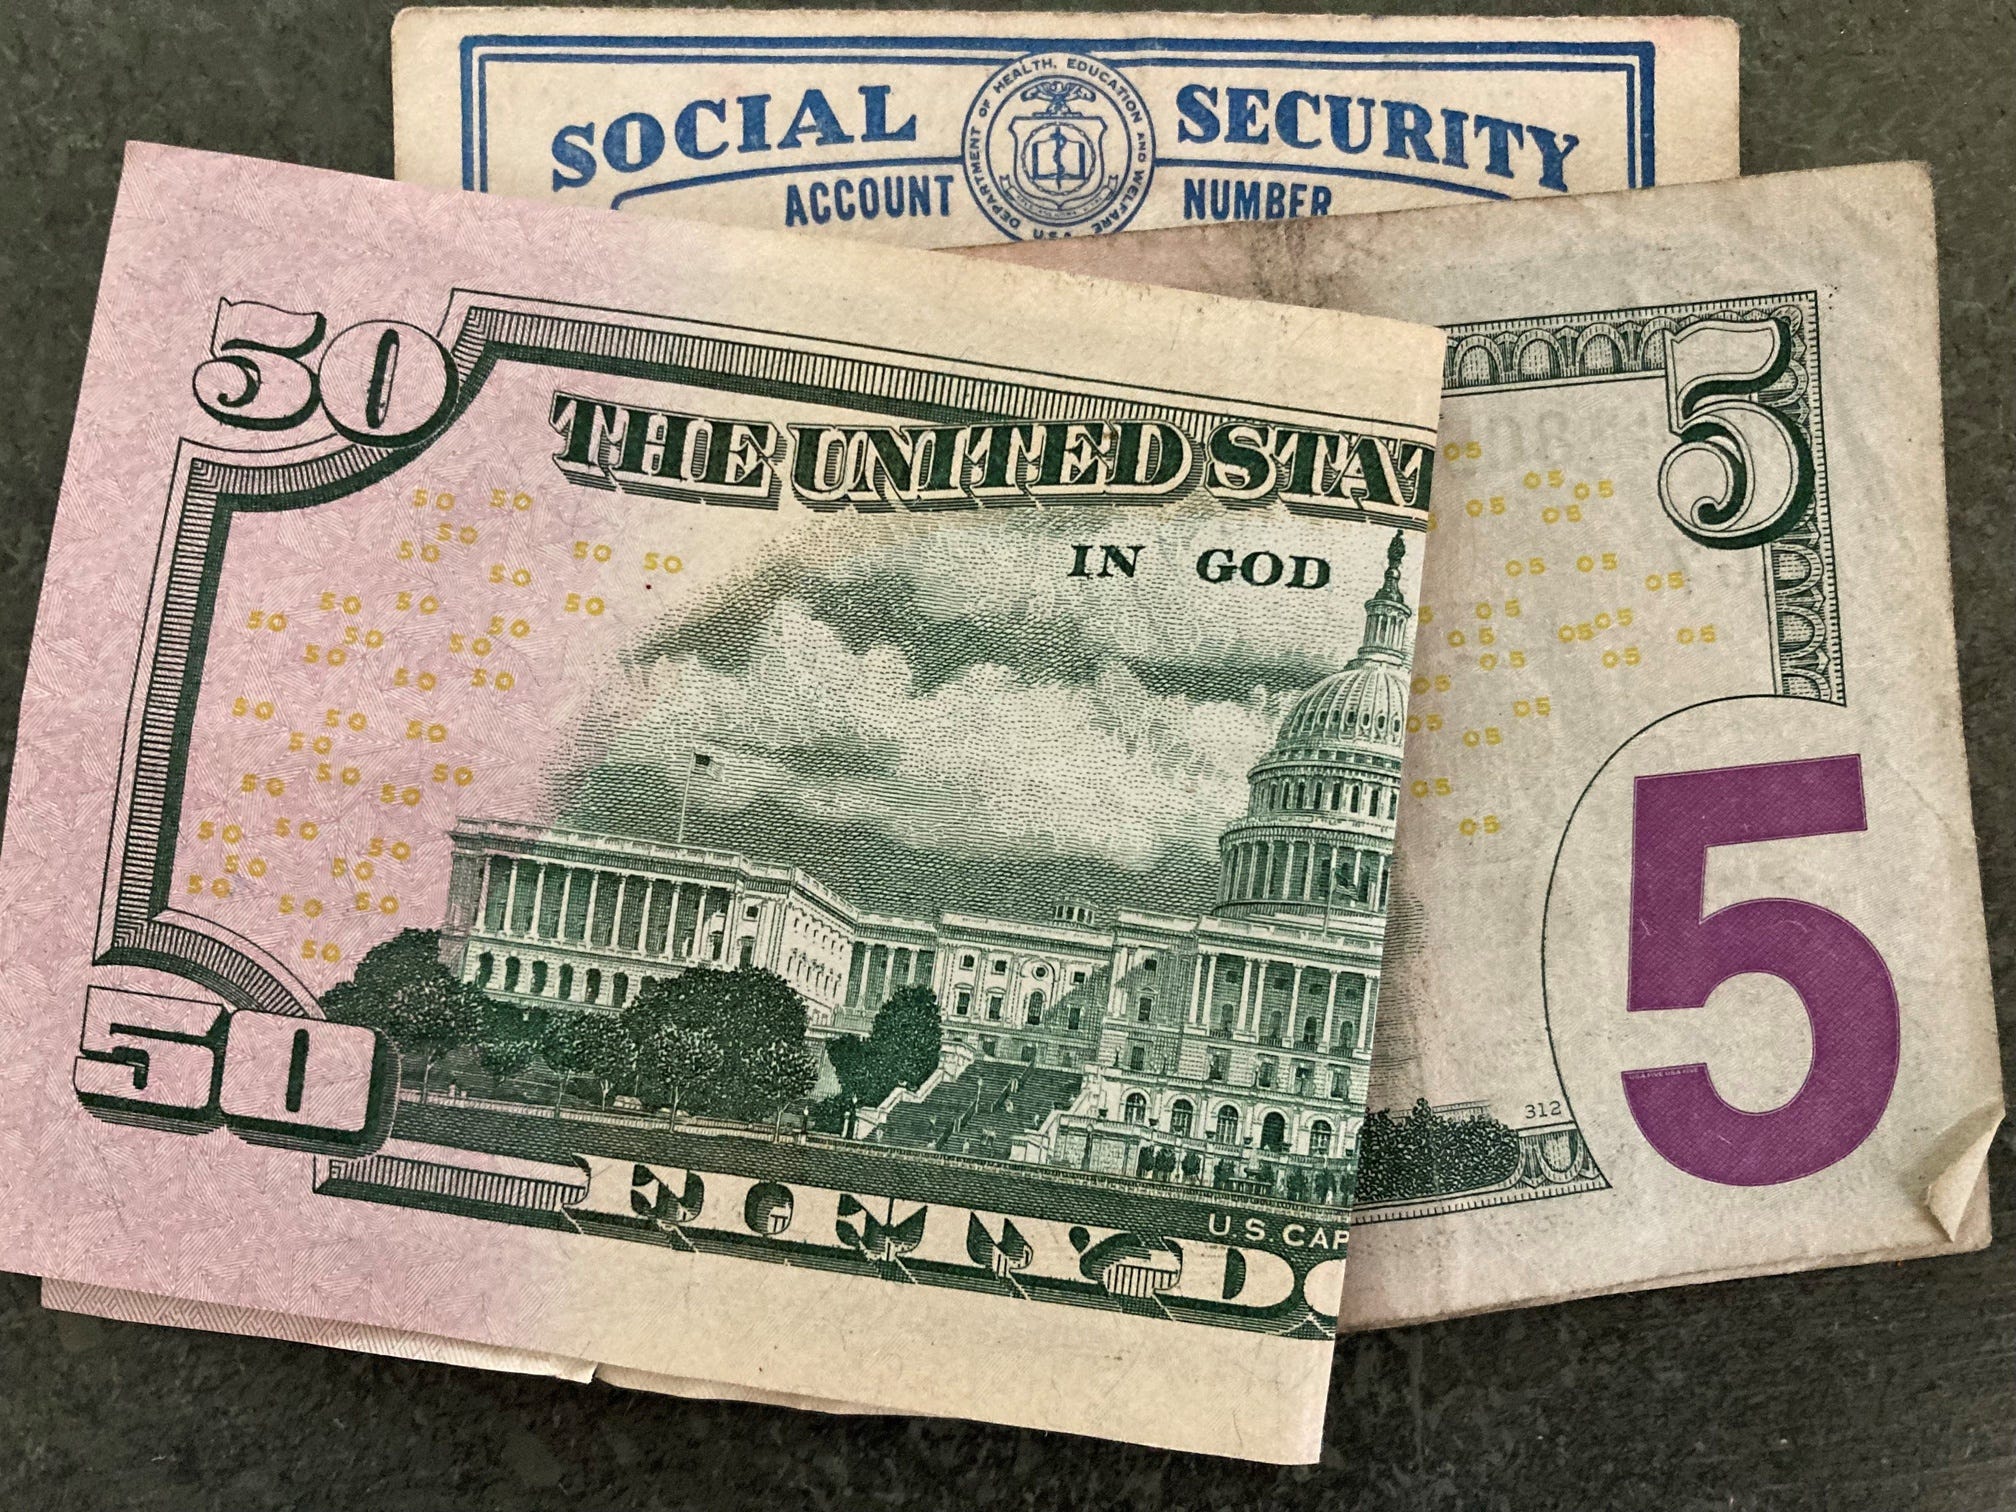 how do i apply for social security for the first time?